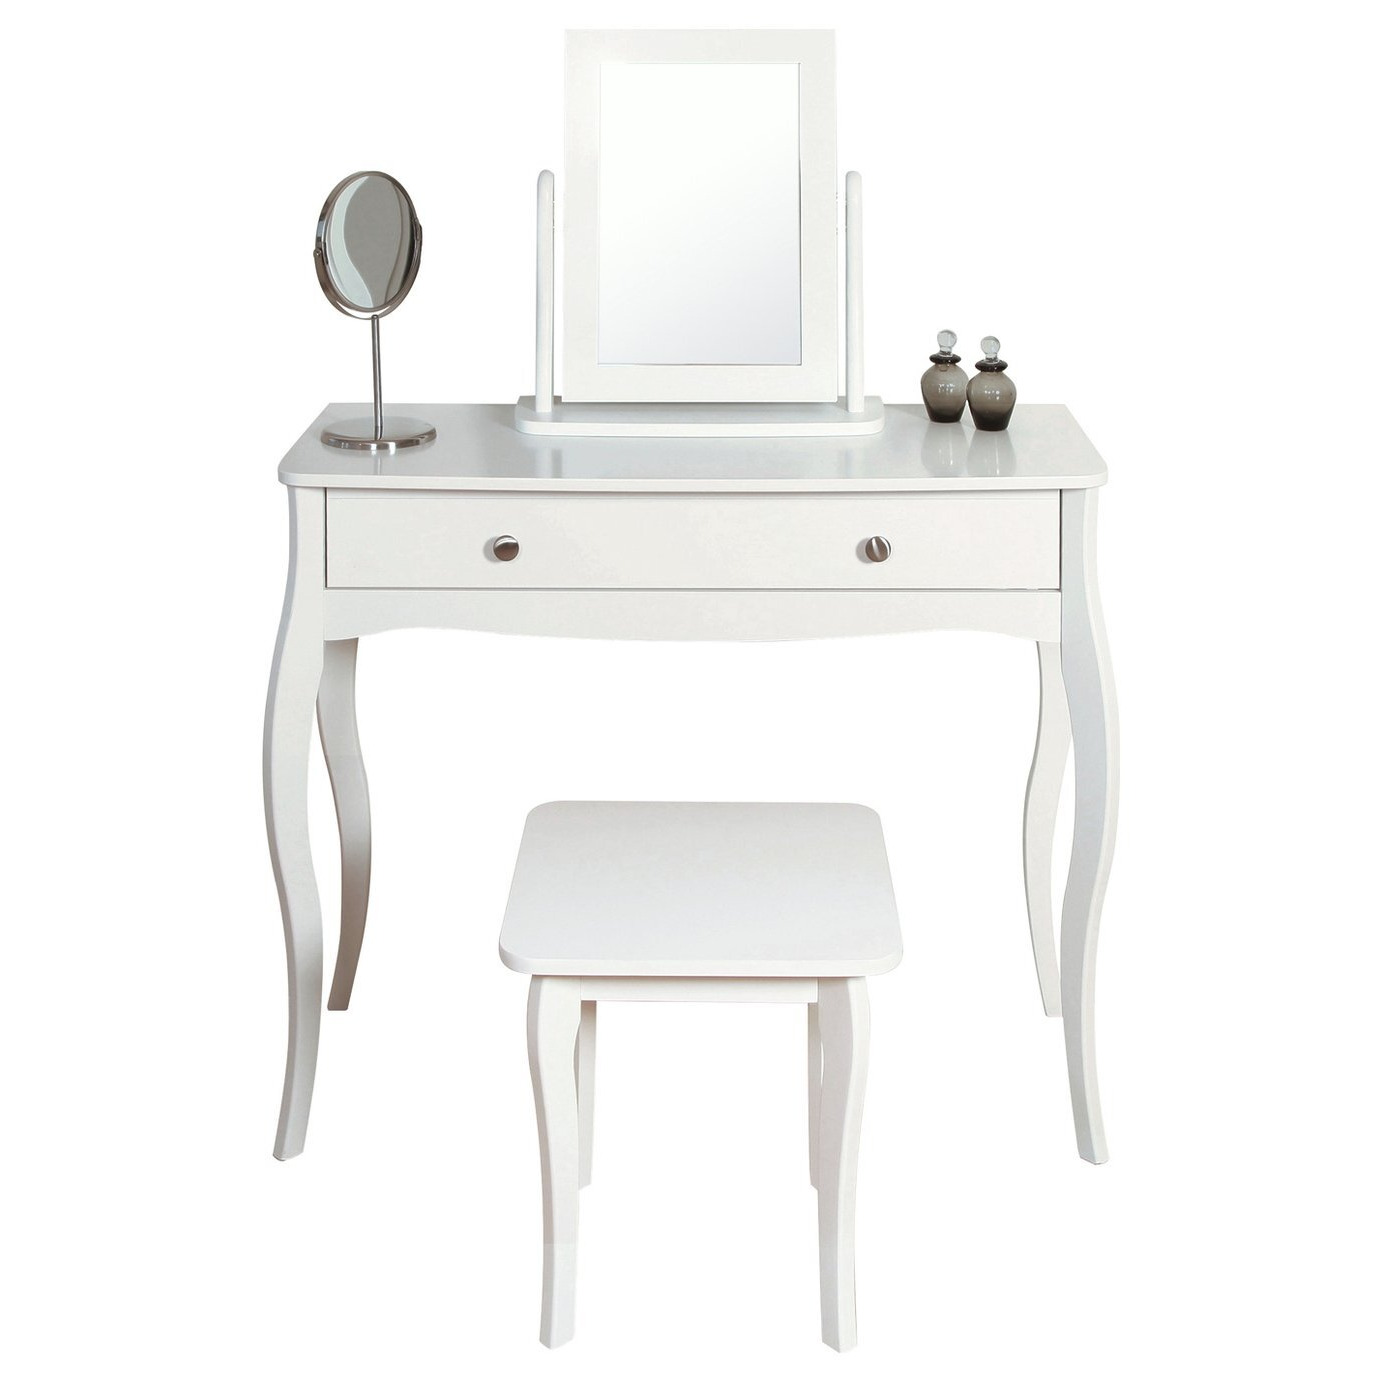 Amelie Dressing Table, Mirror and Stool - White - image 1